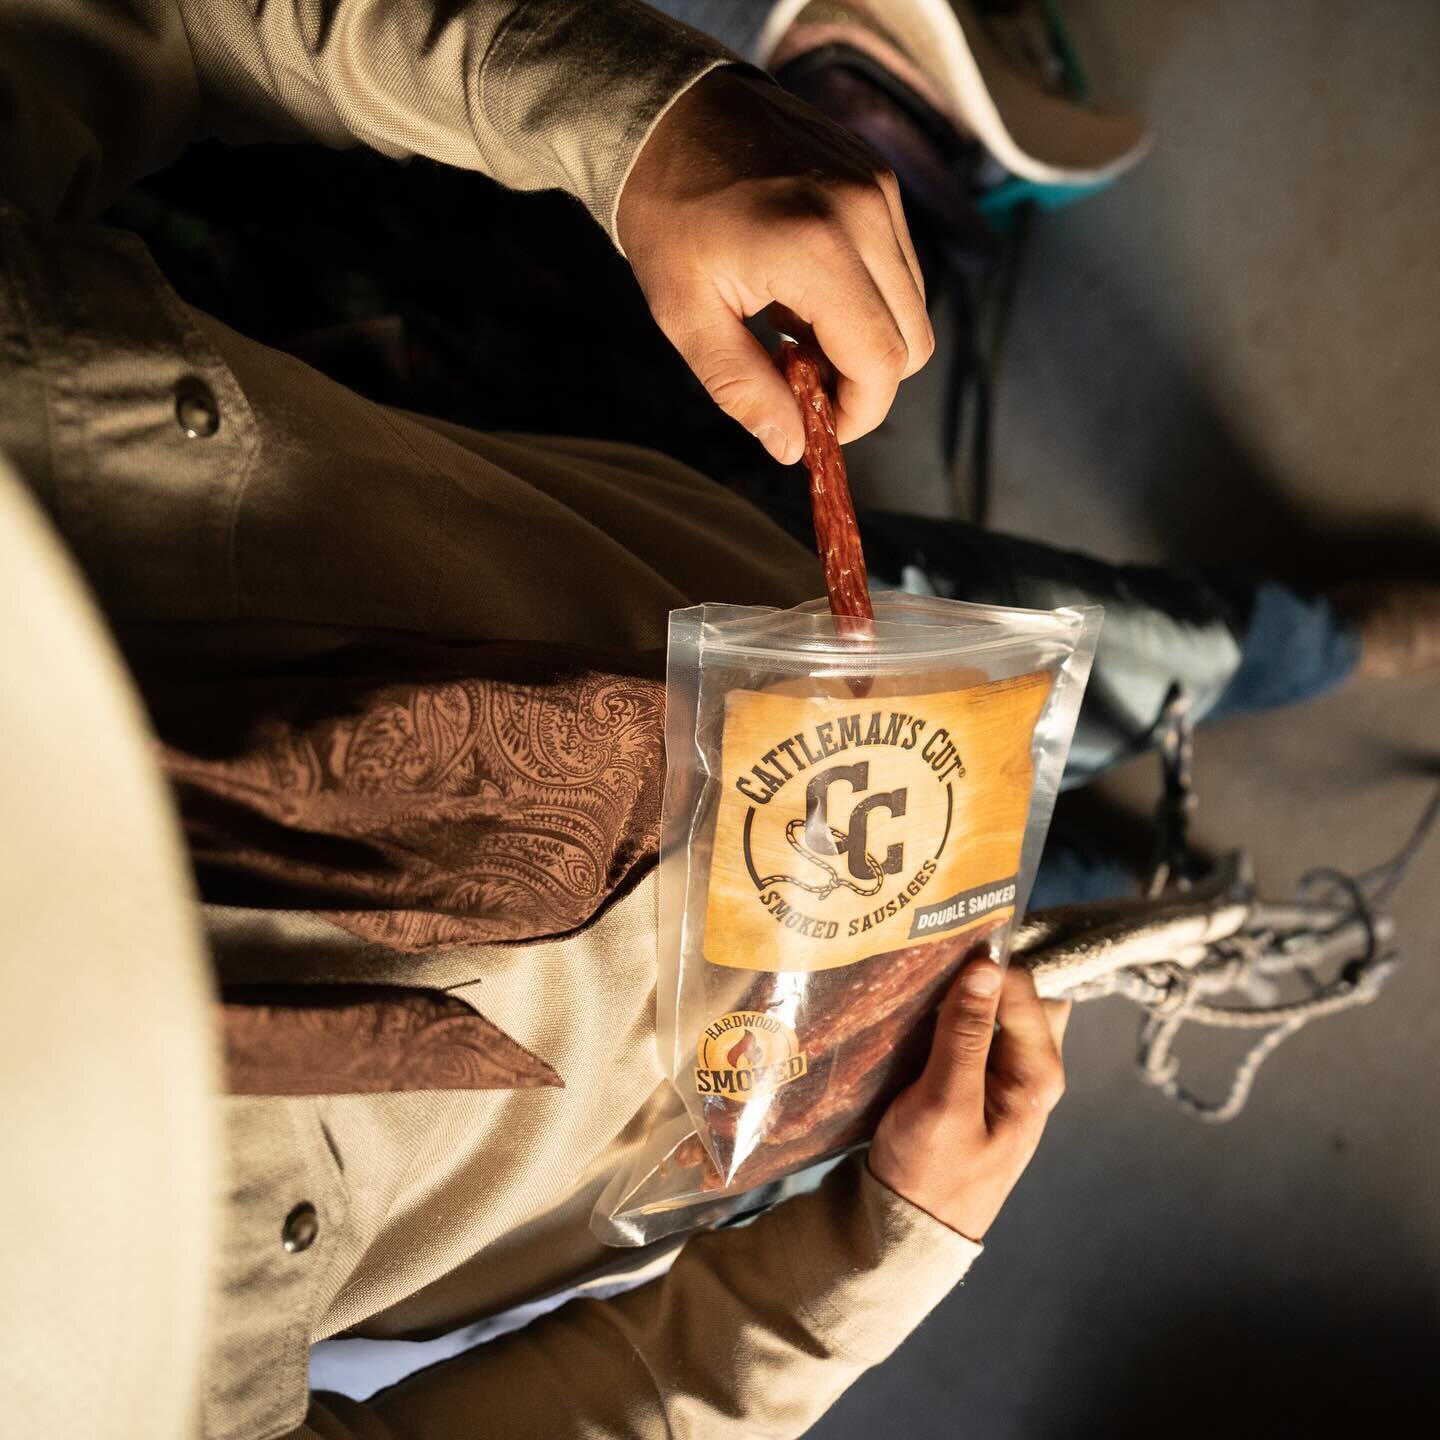 Double smoked for double the flavor with a firm snap - using real hardwood smoke blended with bold, savory ingredients for a delicious flavor we know you&rsquo;ll love! #CattlemanUp 🔥